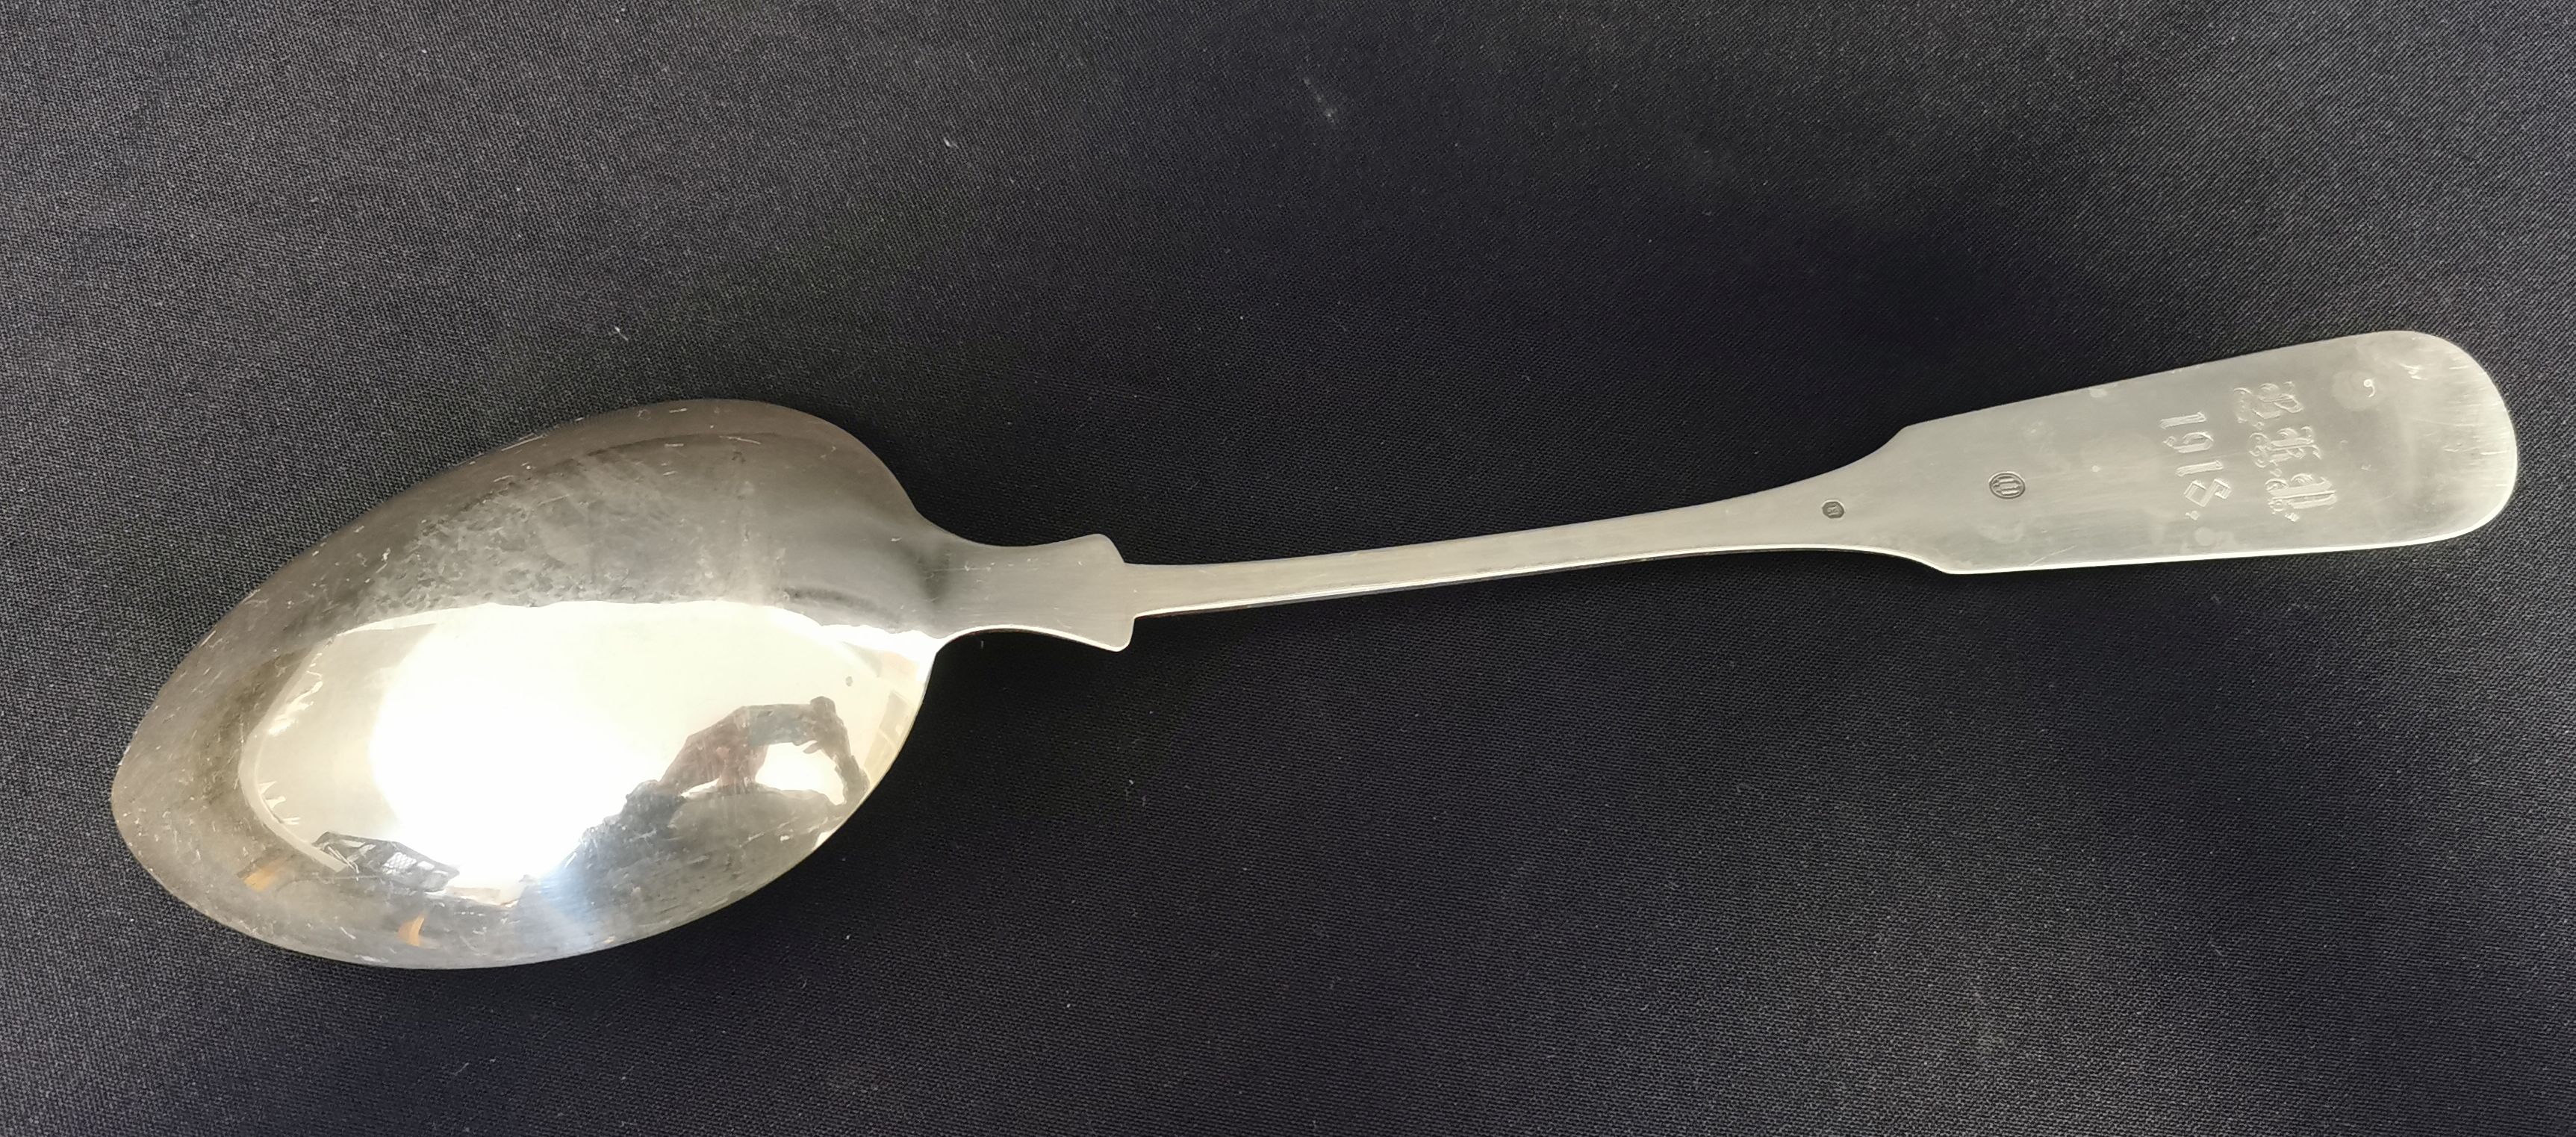 LARGE LADLE FROM 1918 - Image 4 of 5